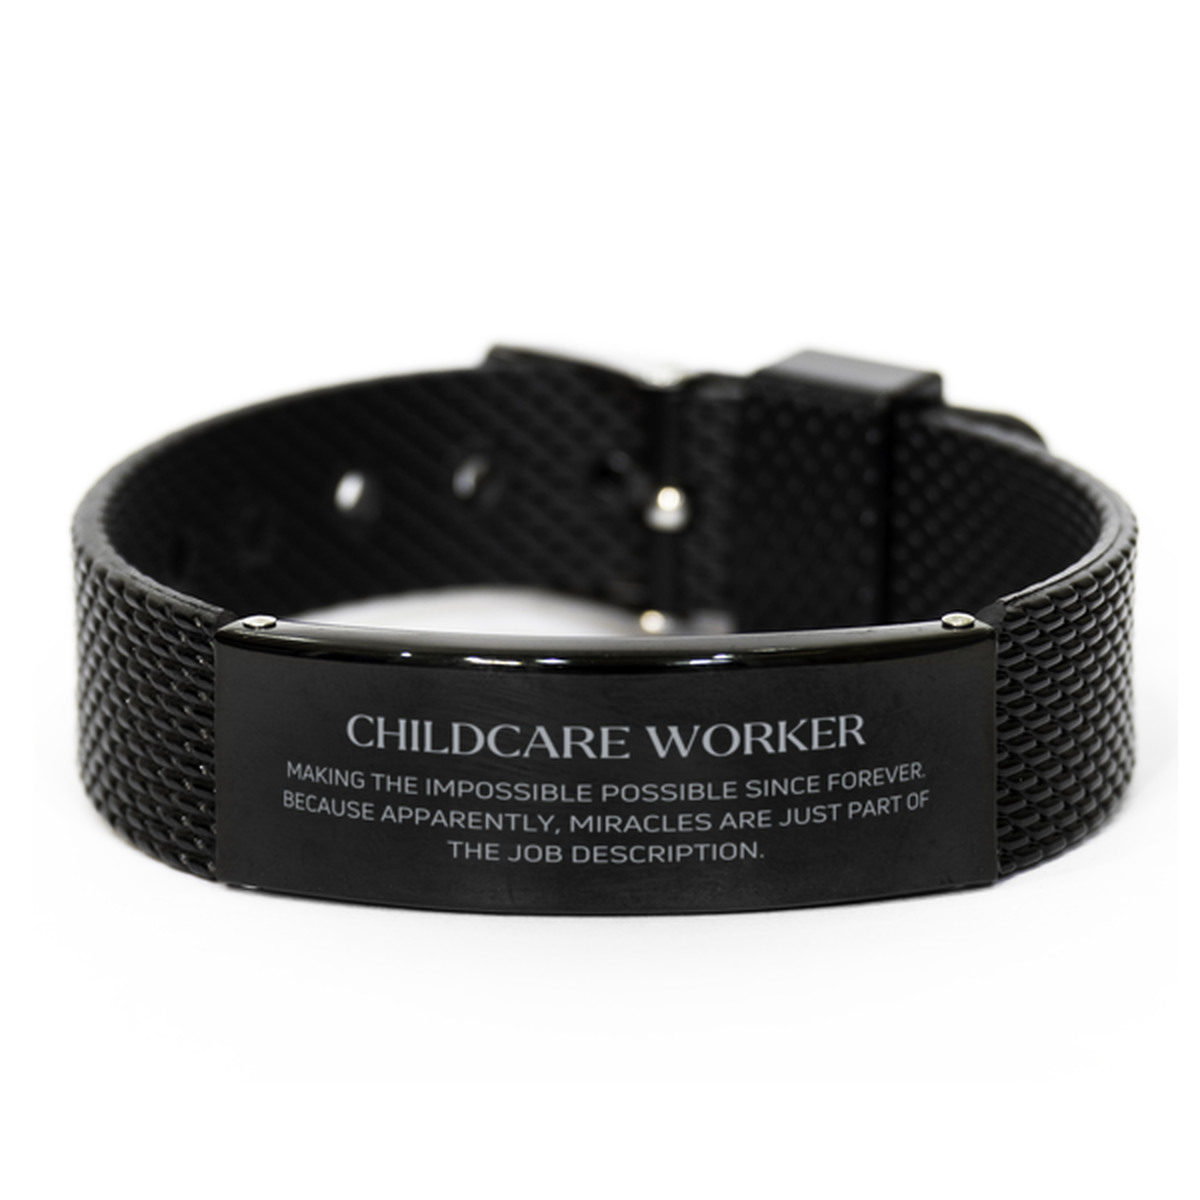 Funny Childcare Worker Gifts, Miracles are just part of the job description, Inspirational Birthday Black Shark Mesh Bracelet For Childcare Worker, Men, Women, Coworkers, Friends, Boss